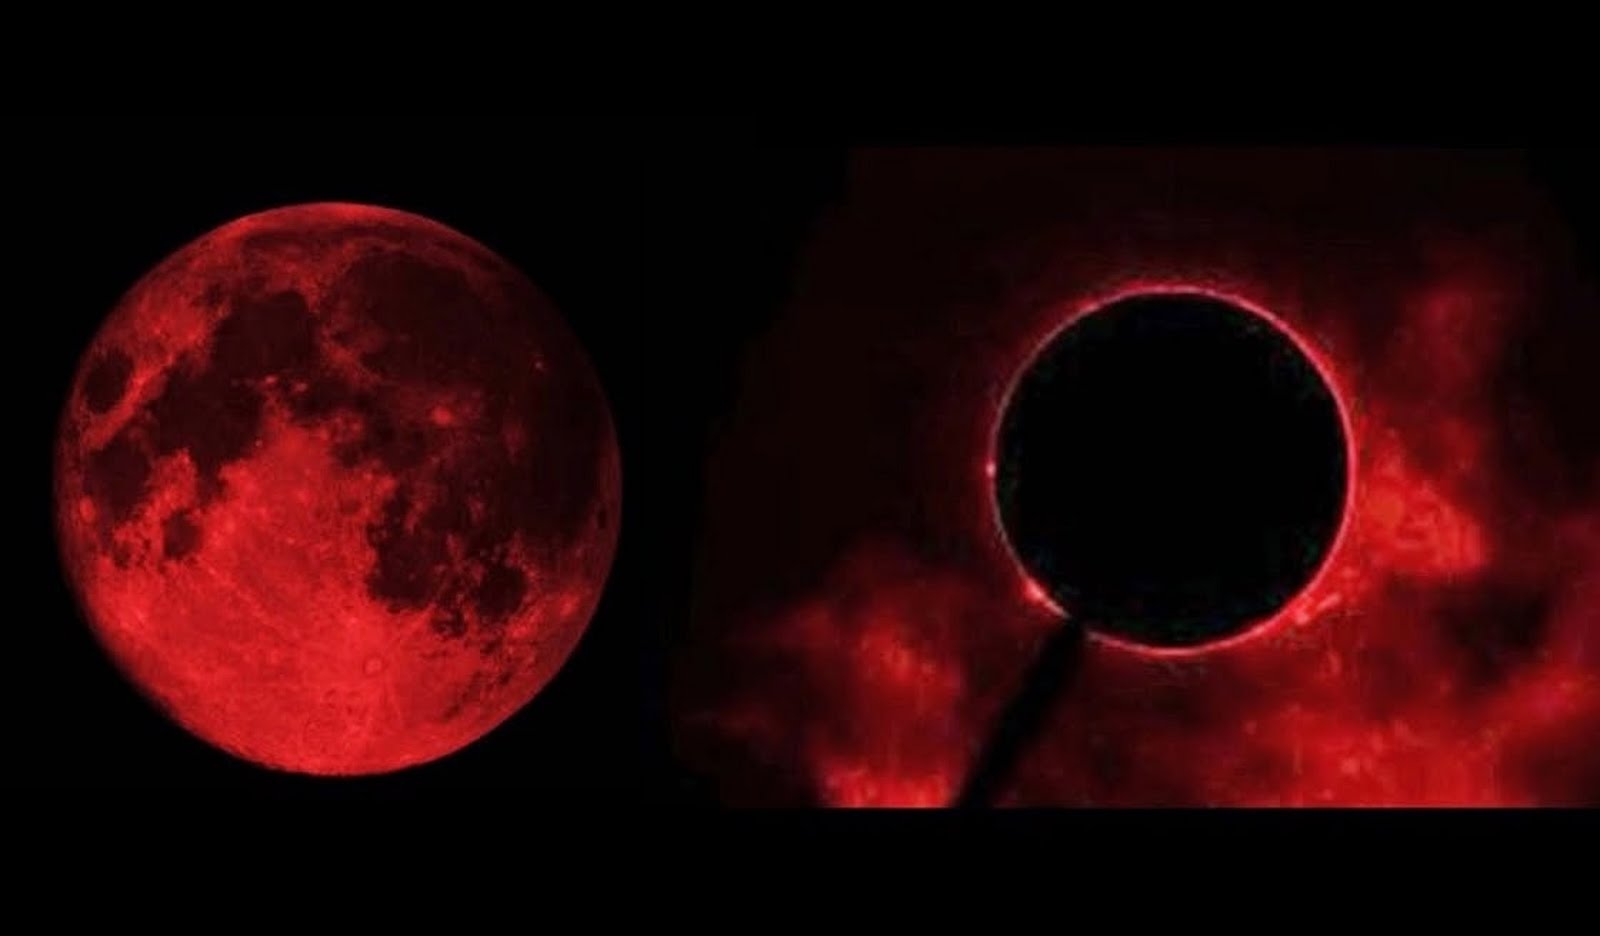 AND THE MOON TURNS TO BLOOD